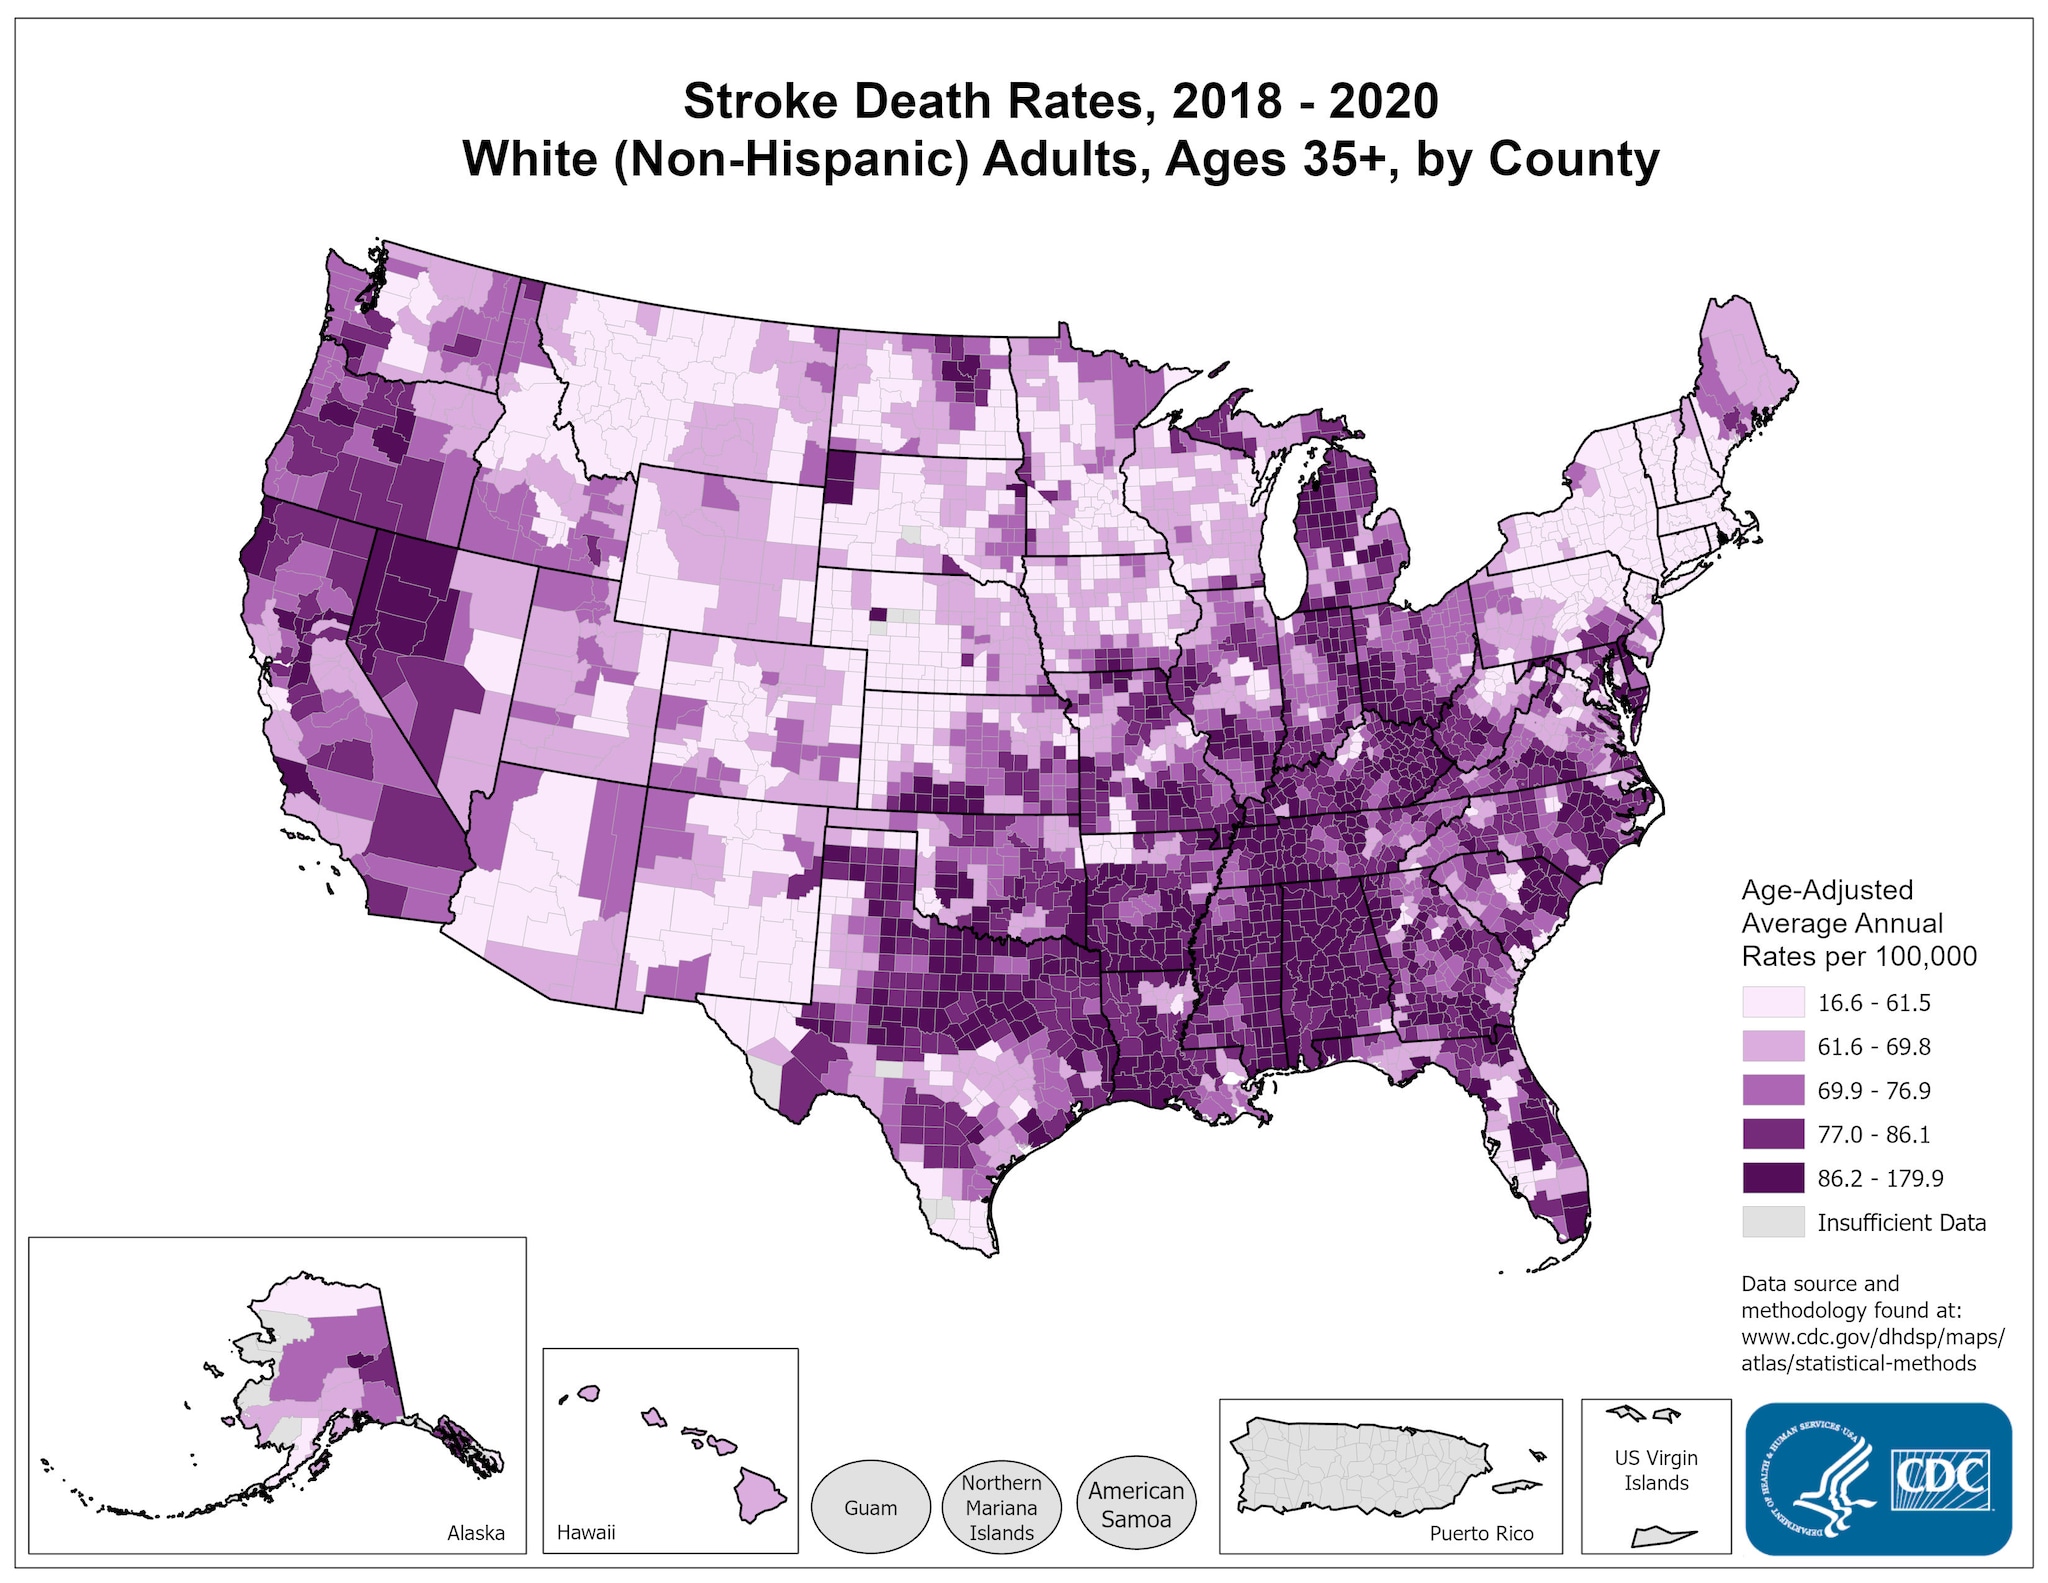 Stroke Death Rates for 2014 through 2016 for Whites Aged 35 Years and Older by County. The map shows that concentrations of counties with the highest stroke death rates - meaning the top quintile - are located primarily in the Southeast, with heavy concentrations of high-rate counties in Arkansas, West Virginia, Missouri, Alabama, Mississippi, Kentucky, and parts of Texas. Pockets of high-rate counties also are found in Oklahoma, Illinois, Indiana, North Dakota, Nebraska, South Dakota, North Carolina, South Carolina, and Georgia.